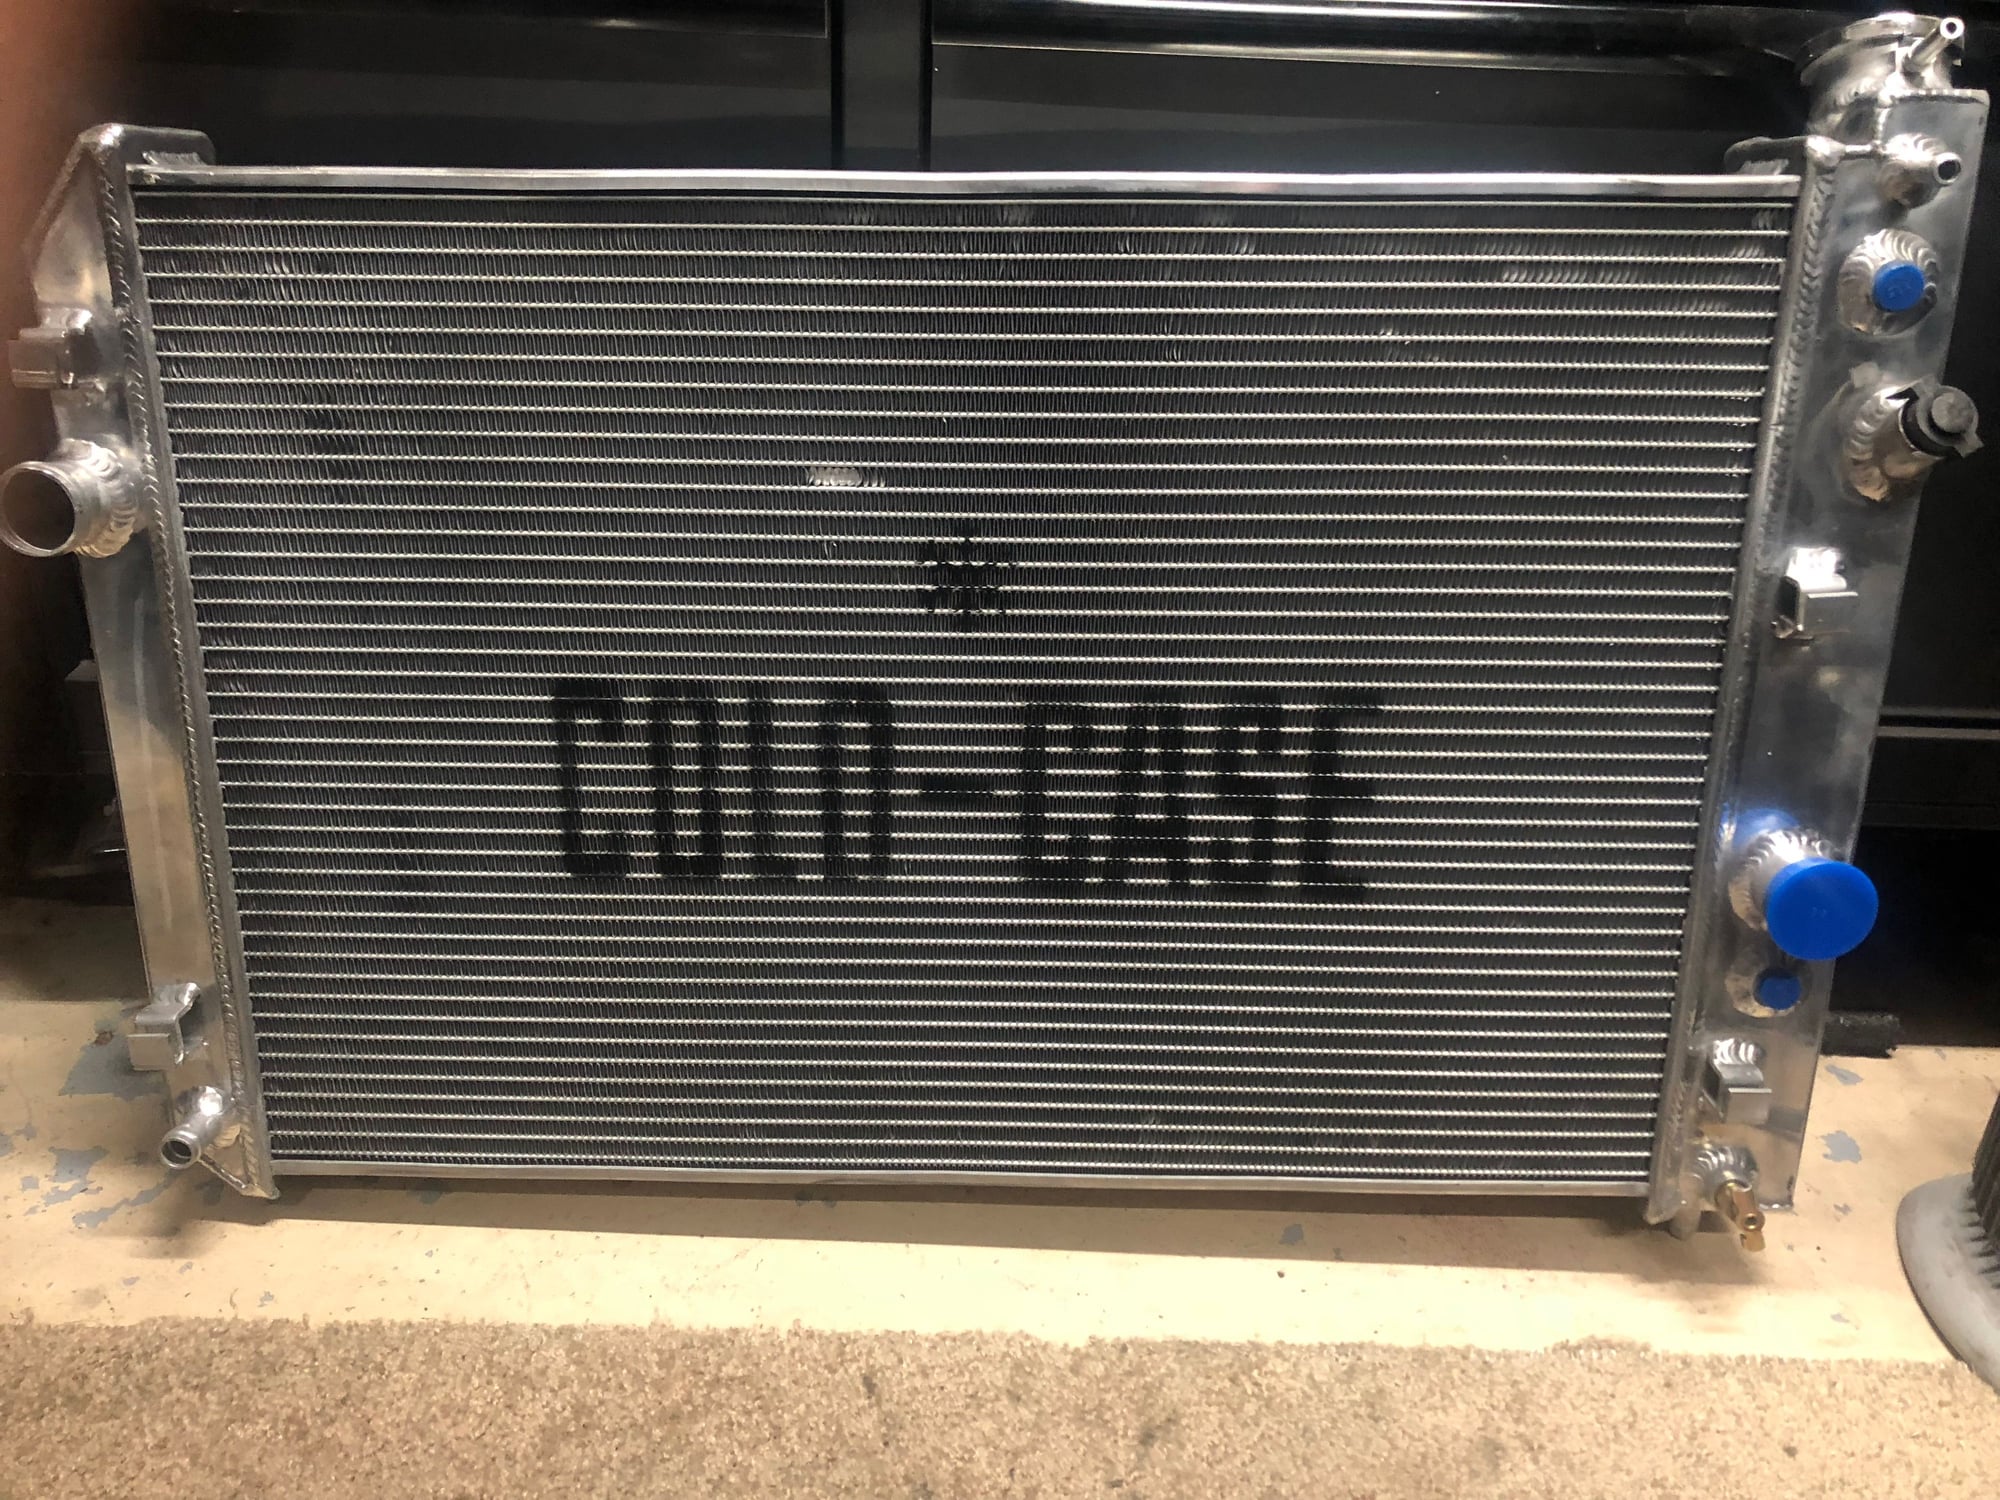 Miscellaneous - New 3in Cold Case radiator for 98-02 camaro/trans-am - New - 1998 to 2002 Chevrolet Camaro - Statesville, NC 28677, United States